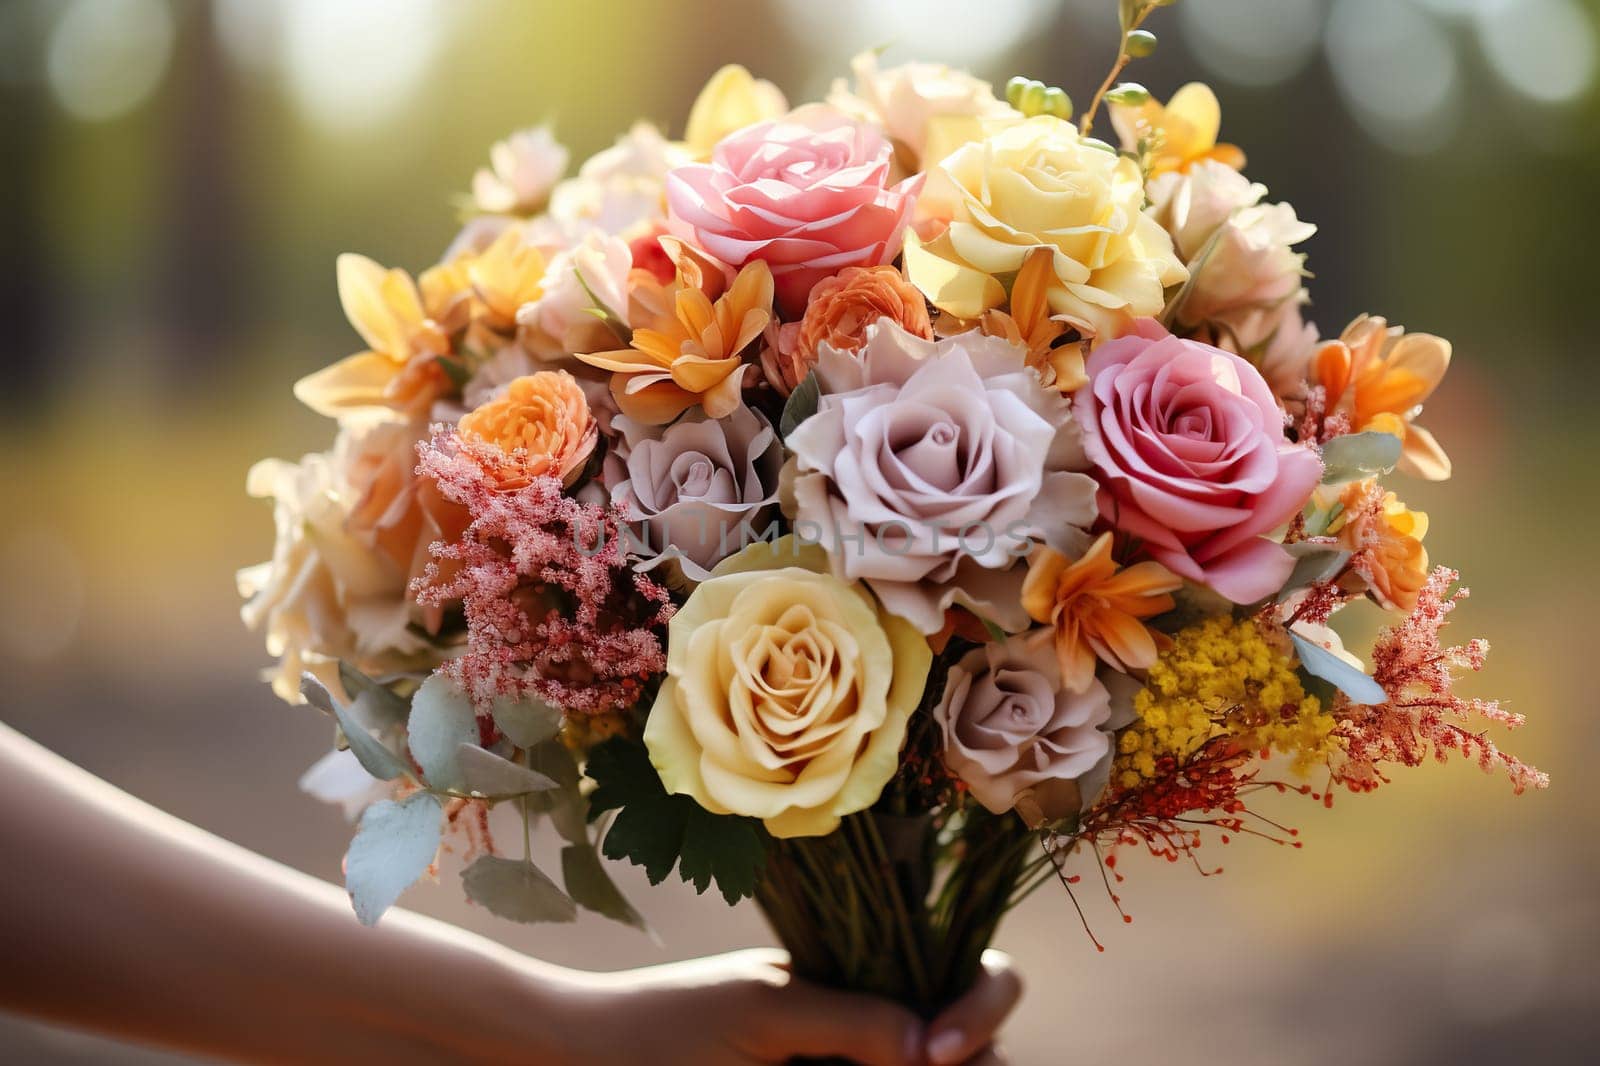 A beautiful bouquet with roses of different colors and decorative branches in a woman’s hand close up.